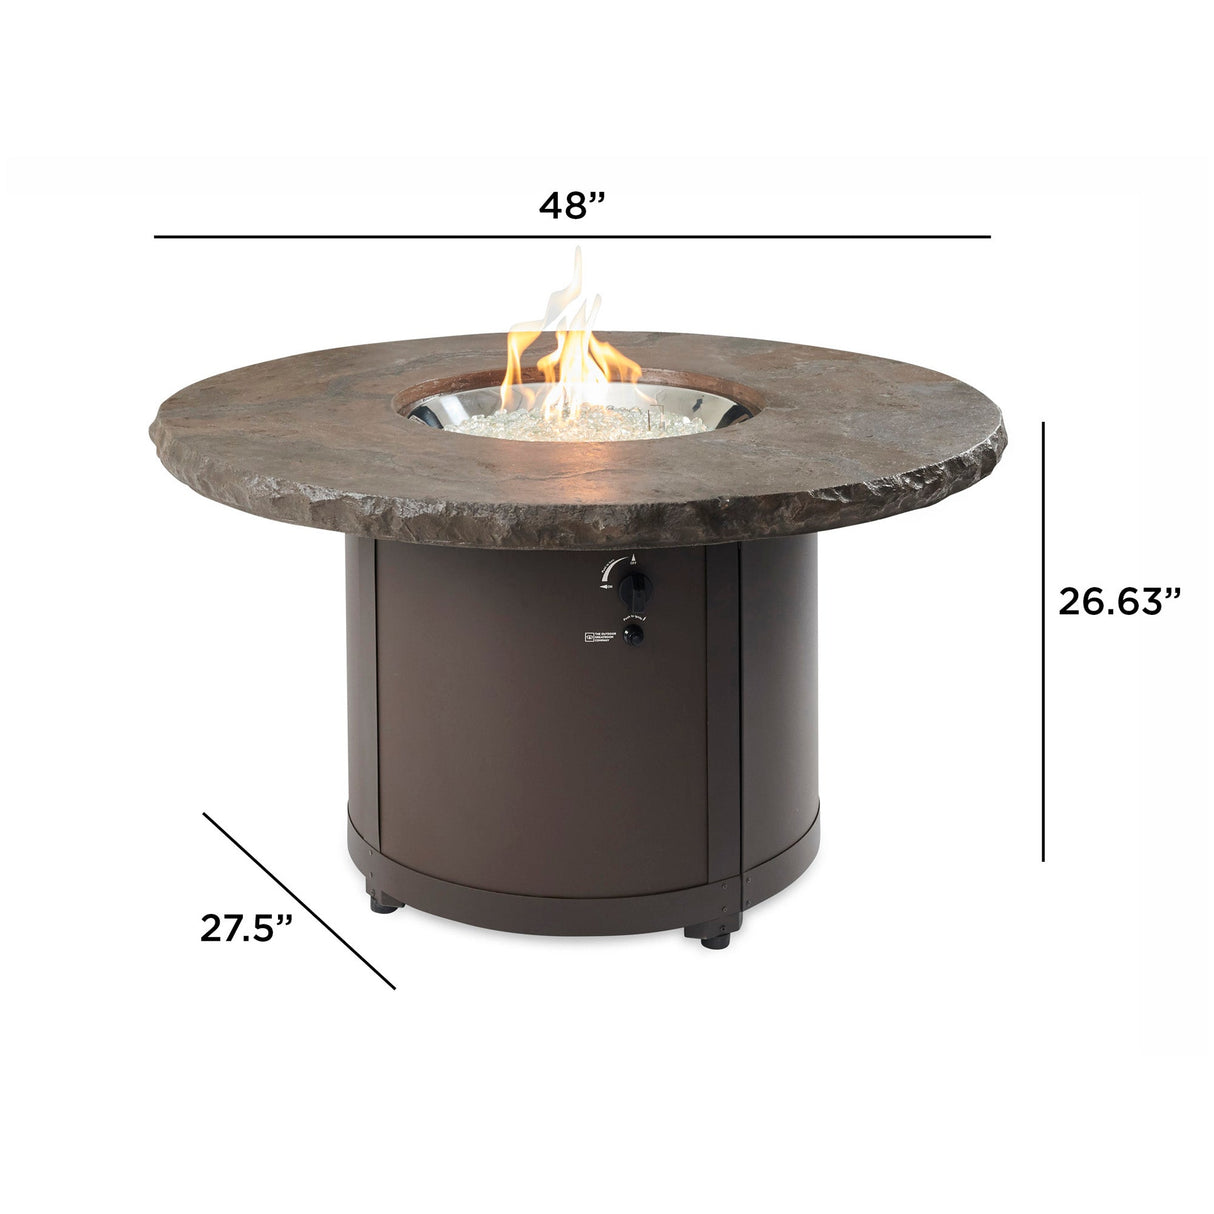 Dimensions overlaid on the Marbleized Noche Beacon Round Gas Fire Pit Table